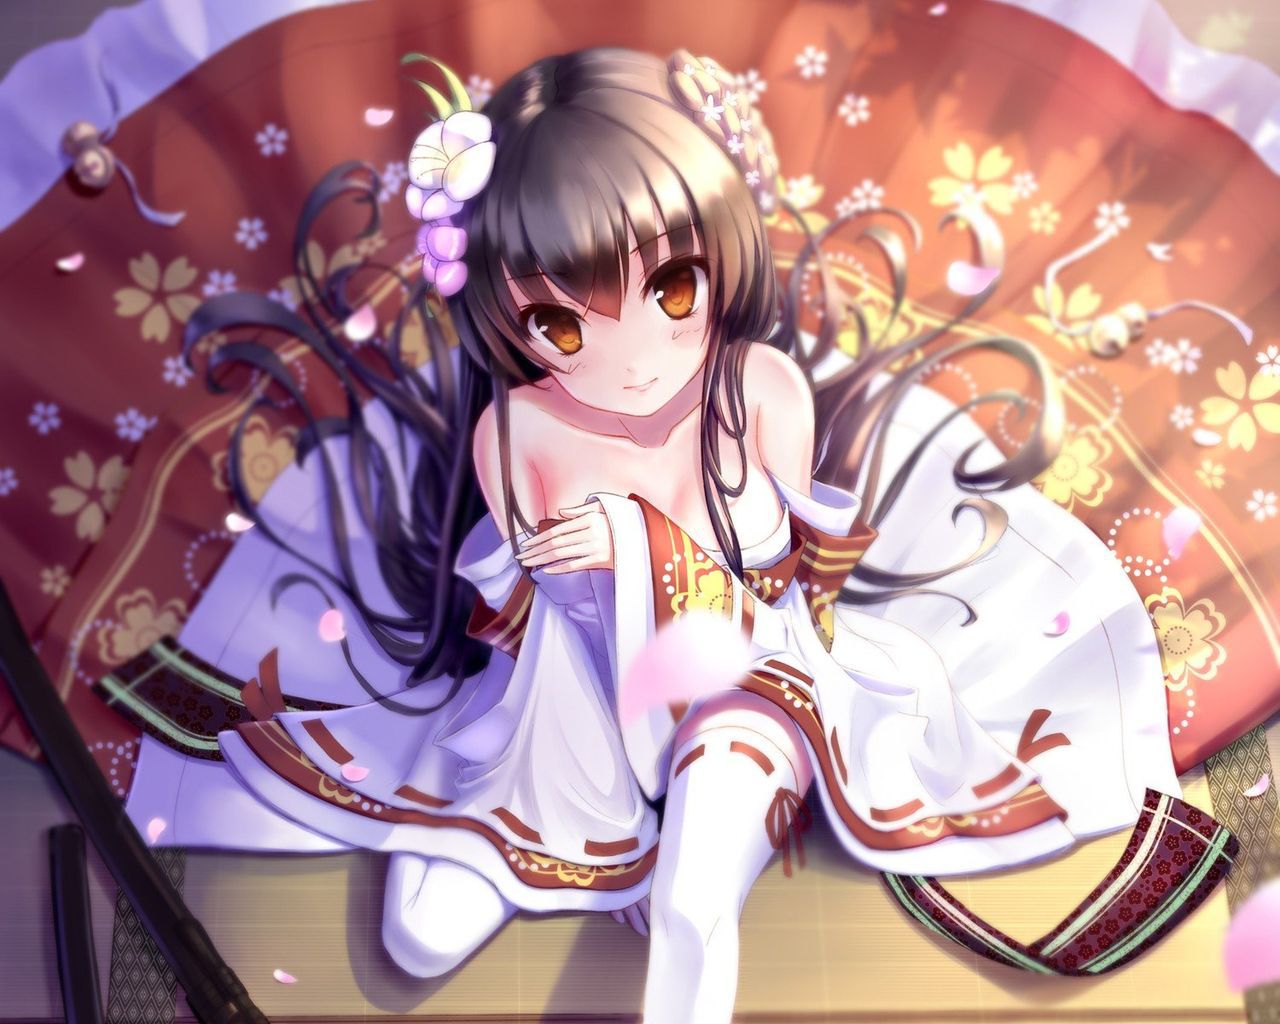 【Shrine Maiden】Please image of a girl in neat shrine maiden clothes Part 16 27